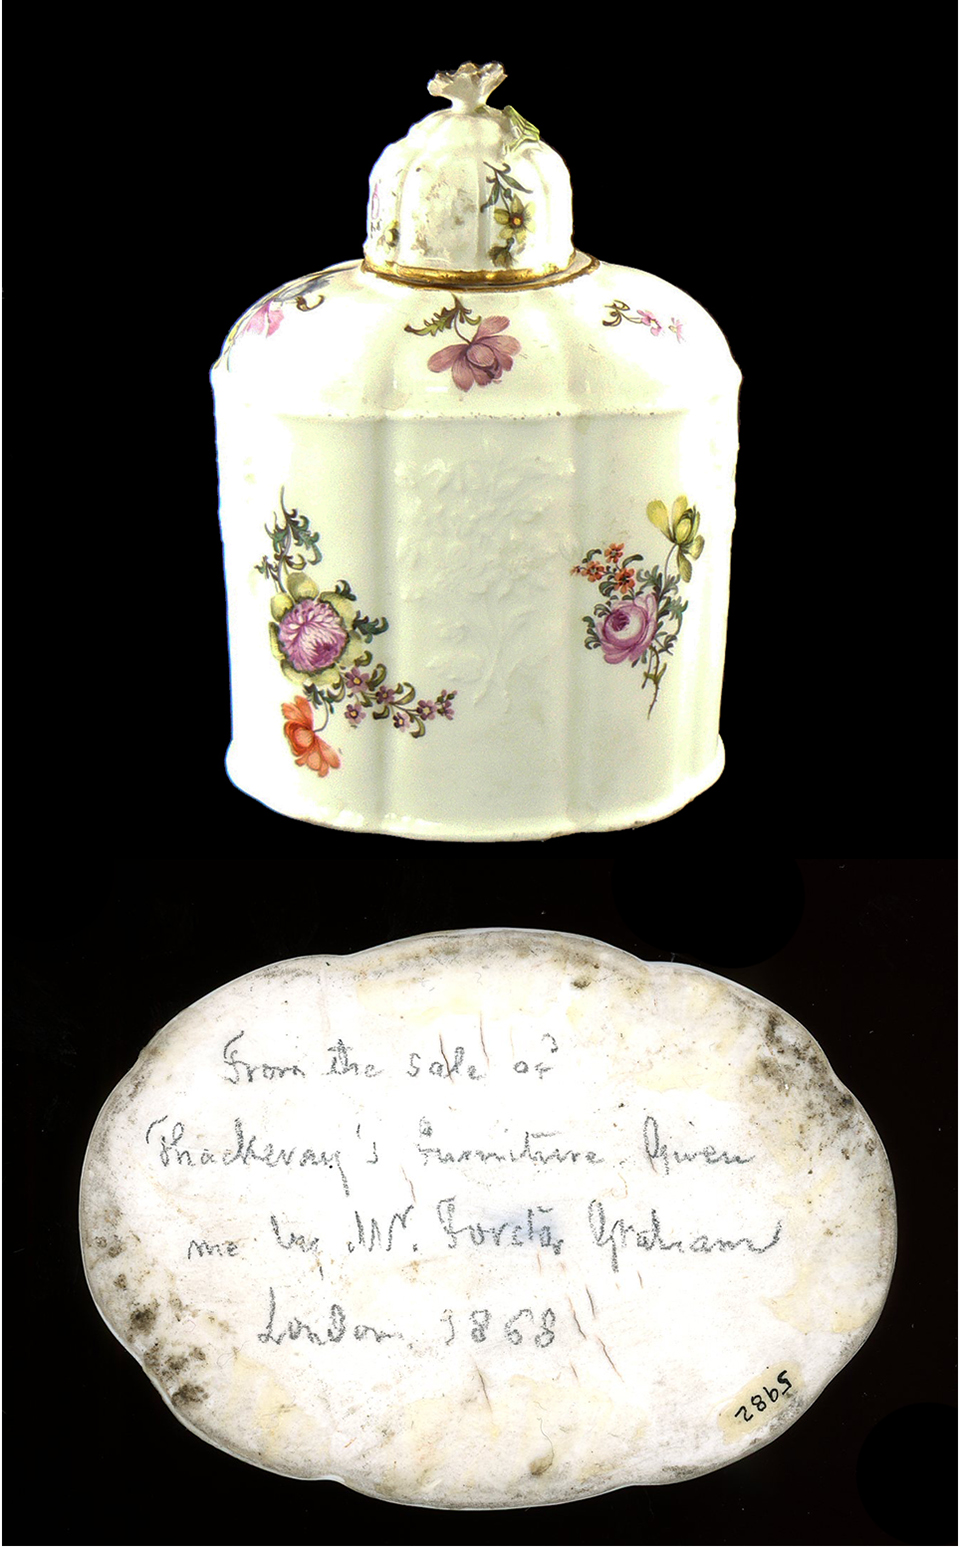 A white porcelain tea caddy with floral decoration and a domed lid with gilt edging.